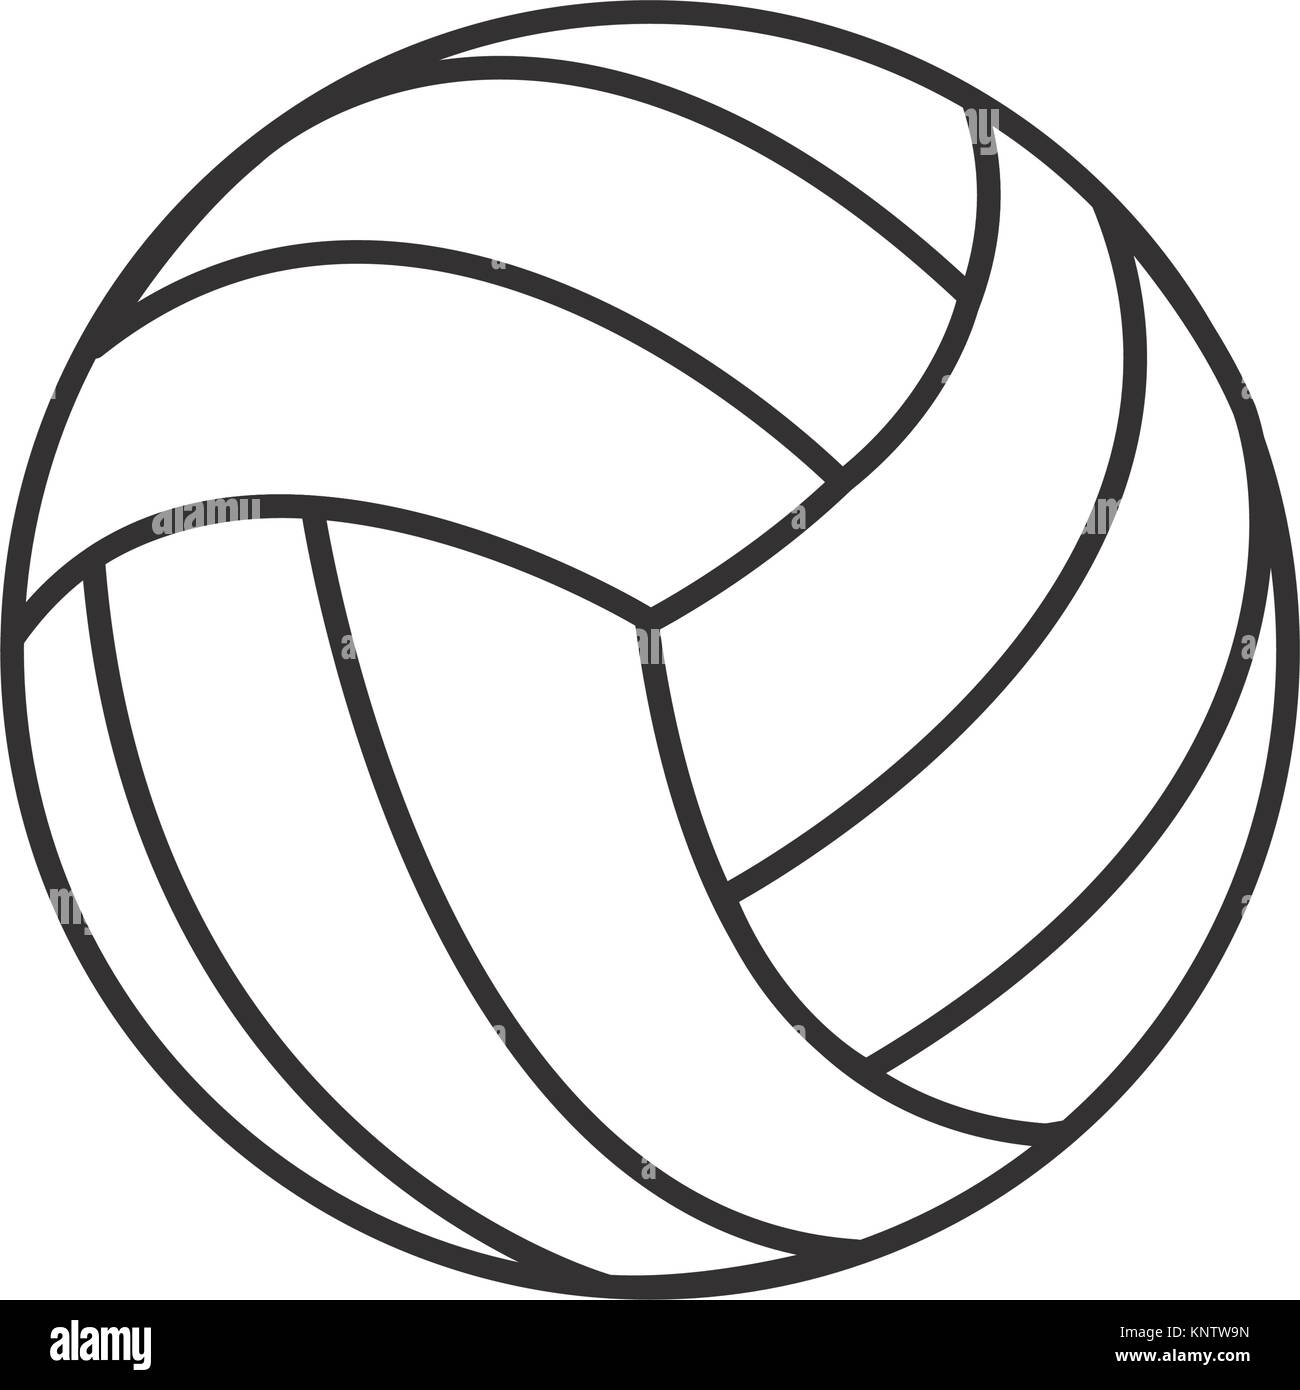 Volleyball Team Black and White Stock Photos & Images - Alamy